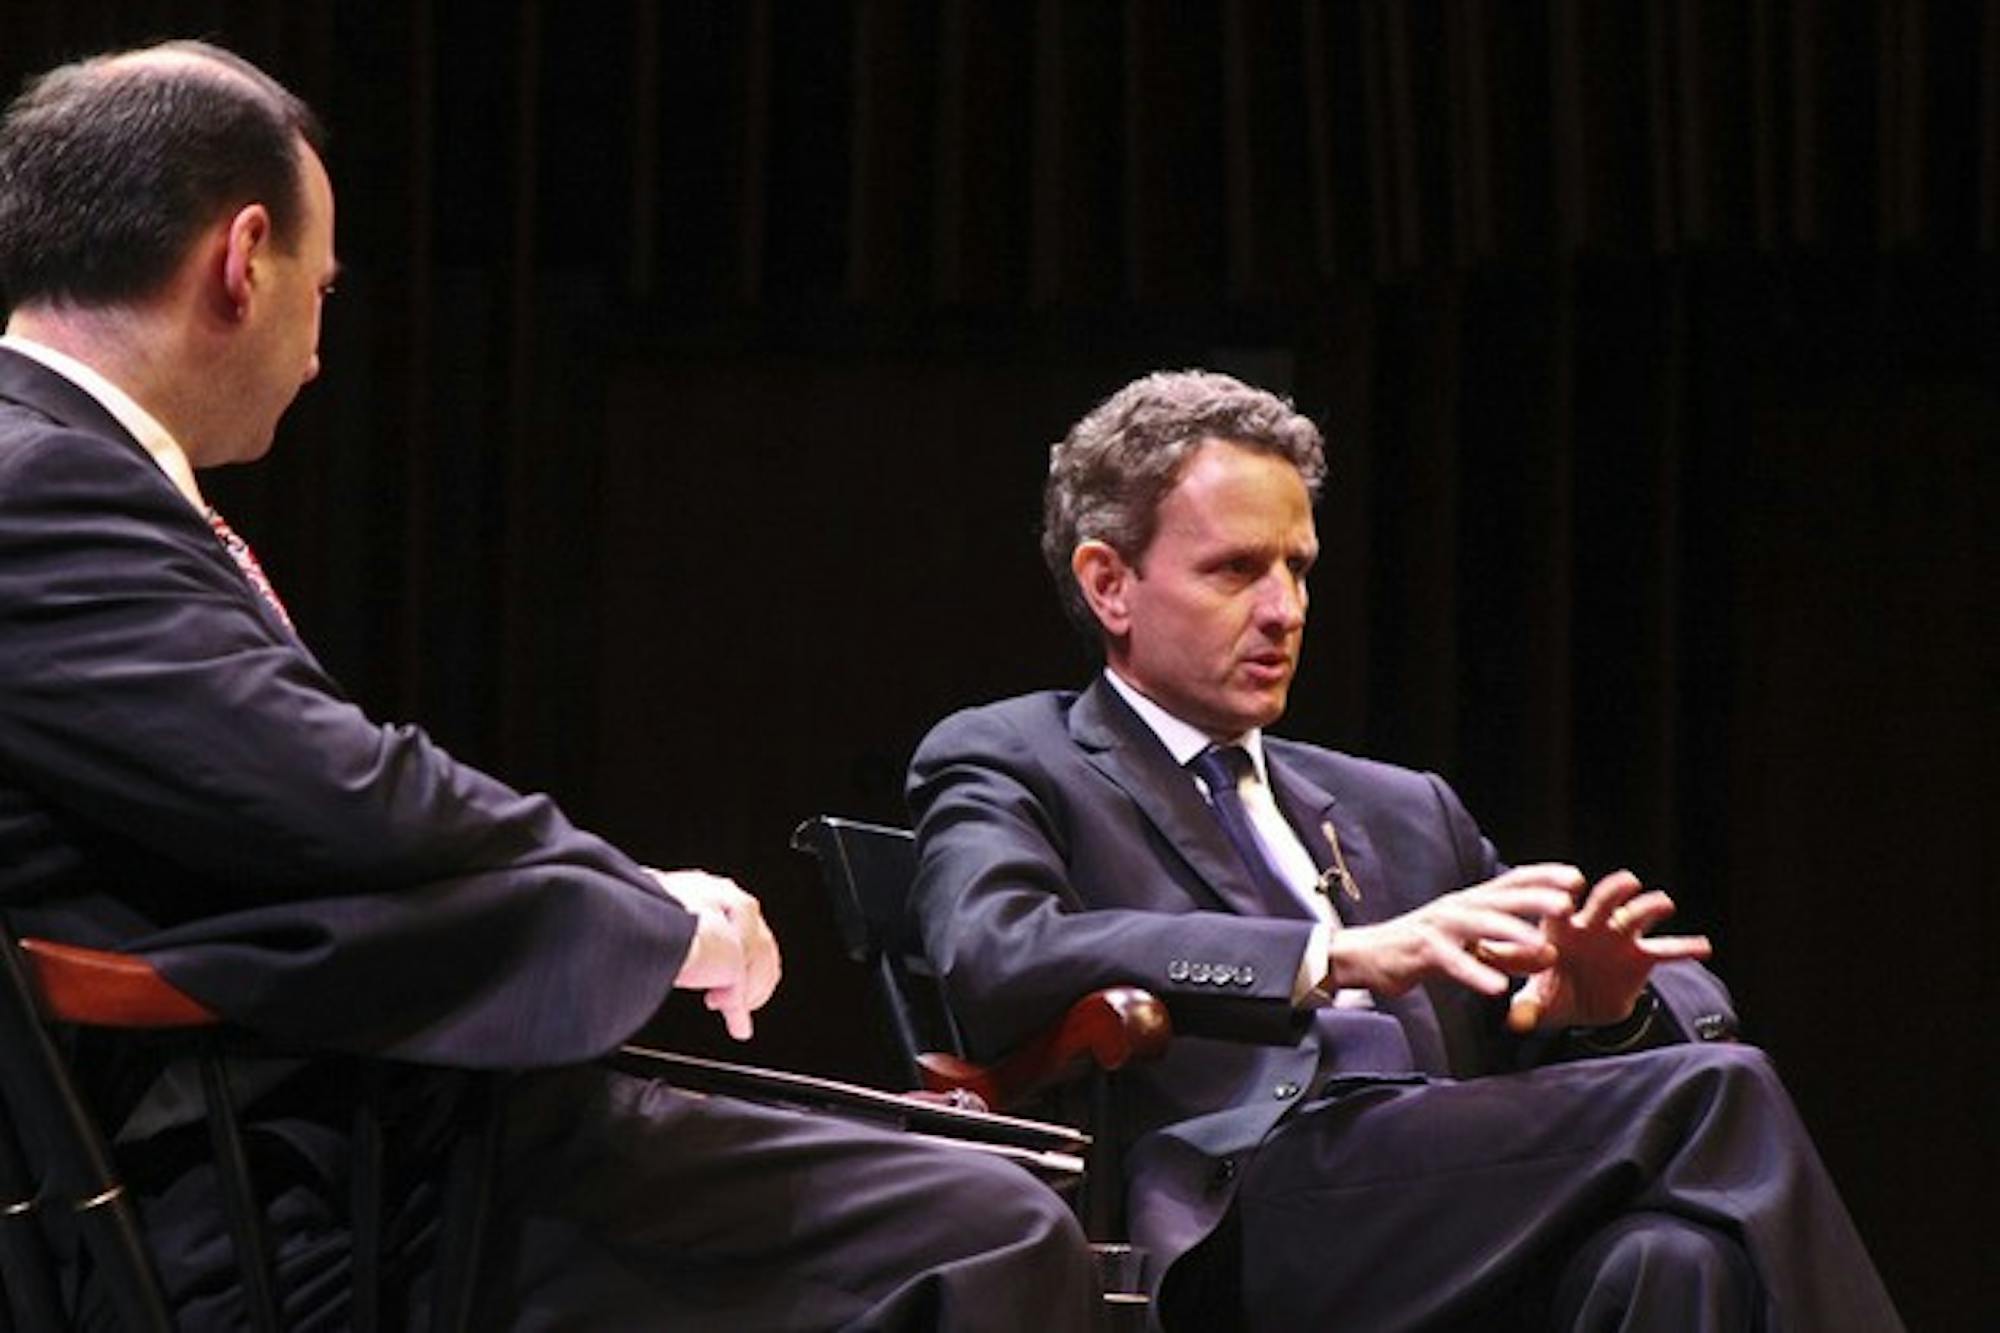 Treasury Secretary Timothy Geithner '83 discussed the ongoing economic recovery in Spaulding Auditorium on Friday.